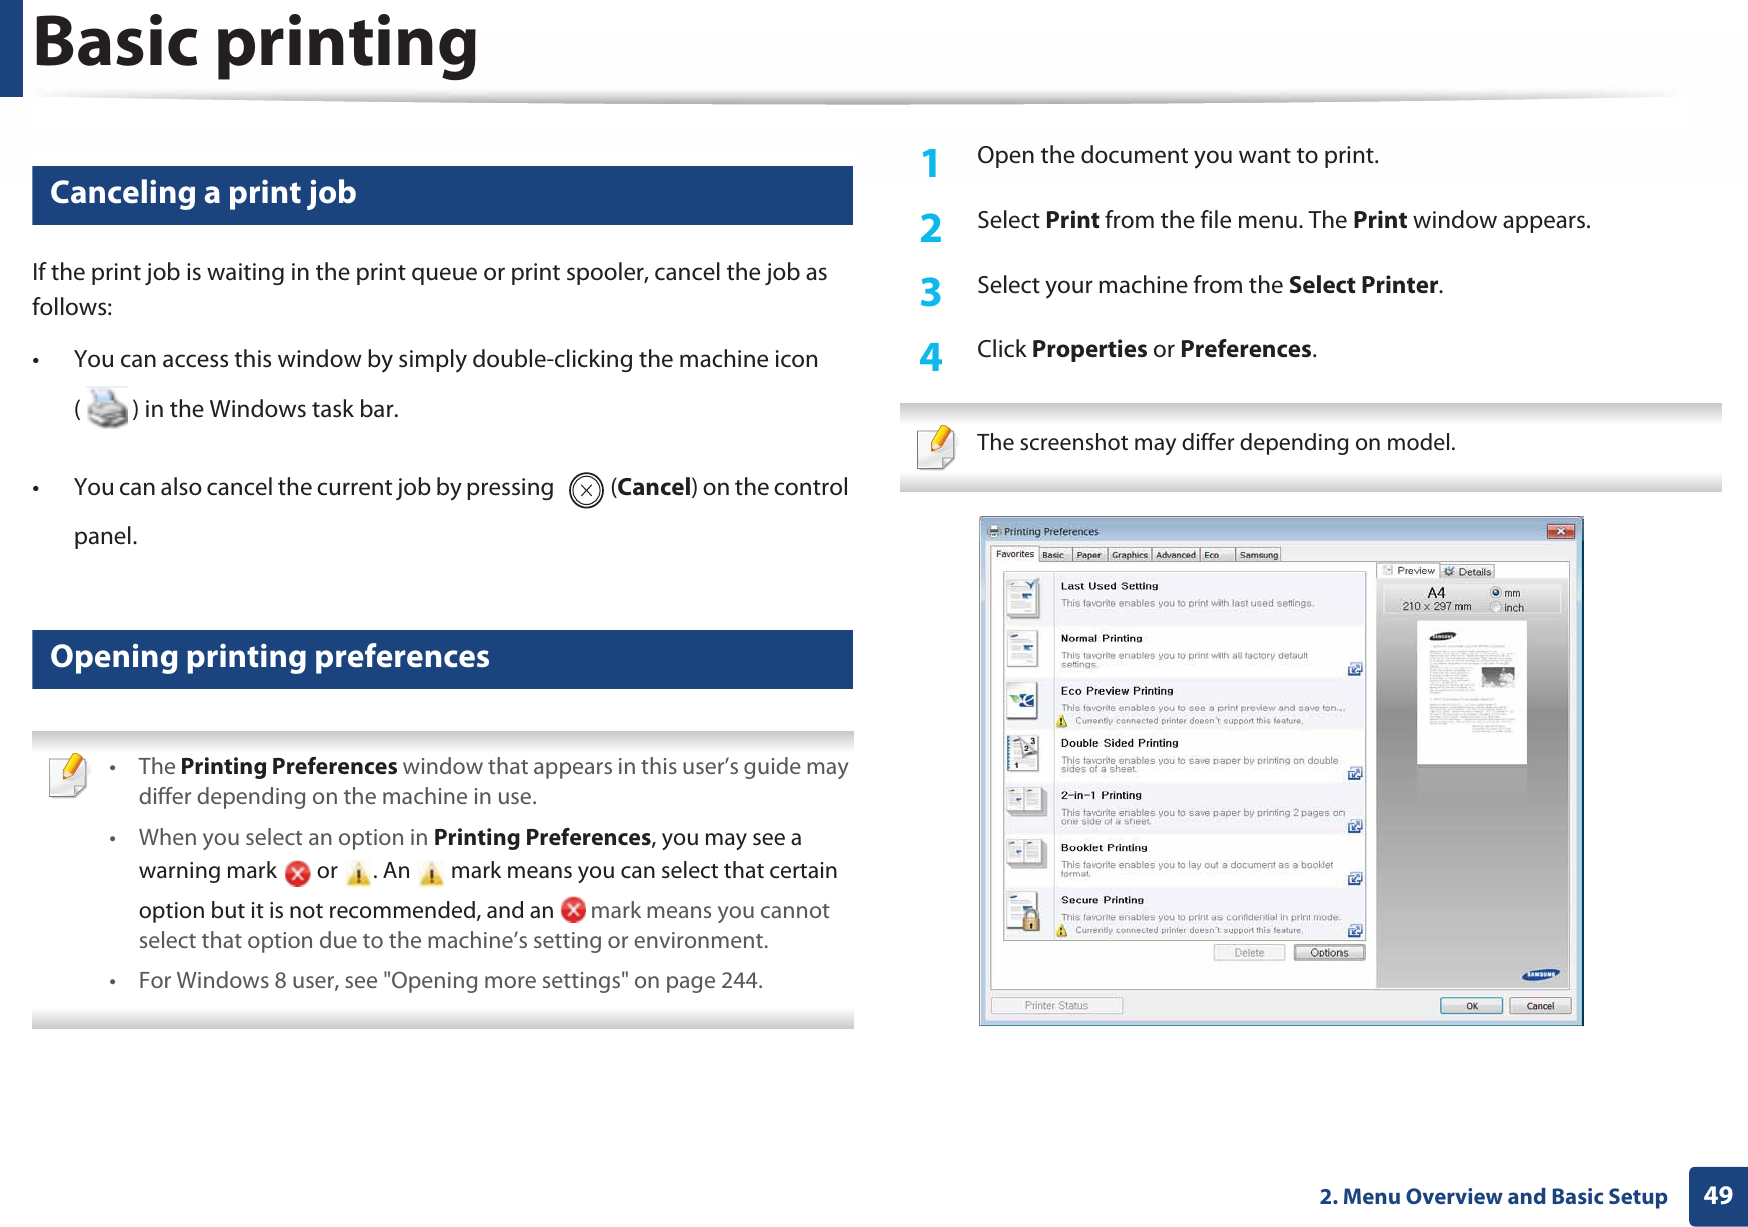 Basic printing492. Menu Overview and Basic Setup8 Canceling a print jobIf the print job is waiting in the print queue or print spooler, cancel the job as follows:• You can access this window by simply double-clicking the machine icon ( ) in the Windows task bar. • You can also cancel the current job by pressing  (Cancel) on the control panel.9 Opening printing preferences • The Printing Preferences window that appears in this user’s guide may differ depending on the machine in use. • When you select an option in Printing Preferences, you may see a warning mark   or  . An   mark means you can select that certain option but it is not recommended, and an   mark means you cannot select that option due to the machine’s setting or environment.• For Windows 8 user, see &quot;Opening more settings&quot; on page 244. 1Open the document you want to print.2  Select Print from the file menu. The Print window appears. 3  Select your machine from the Select Printer. 4  Click Properties or Preferences.  The screenshot may differ depending on model. 